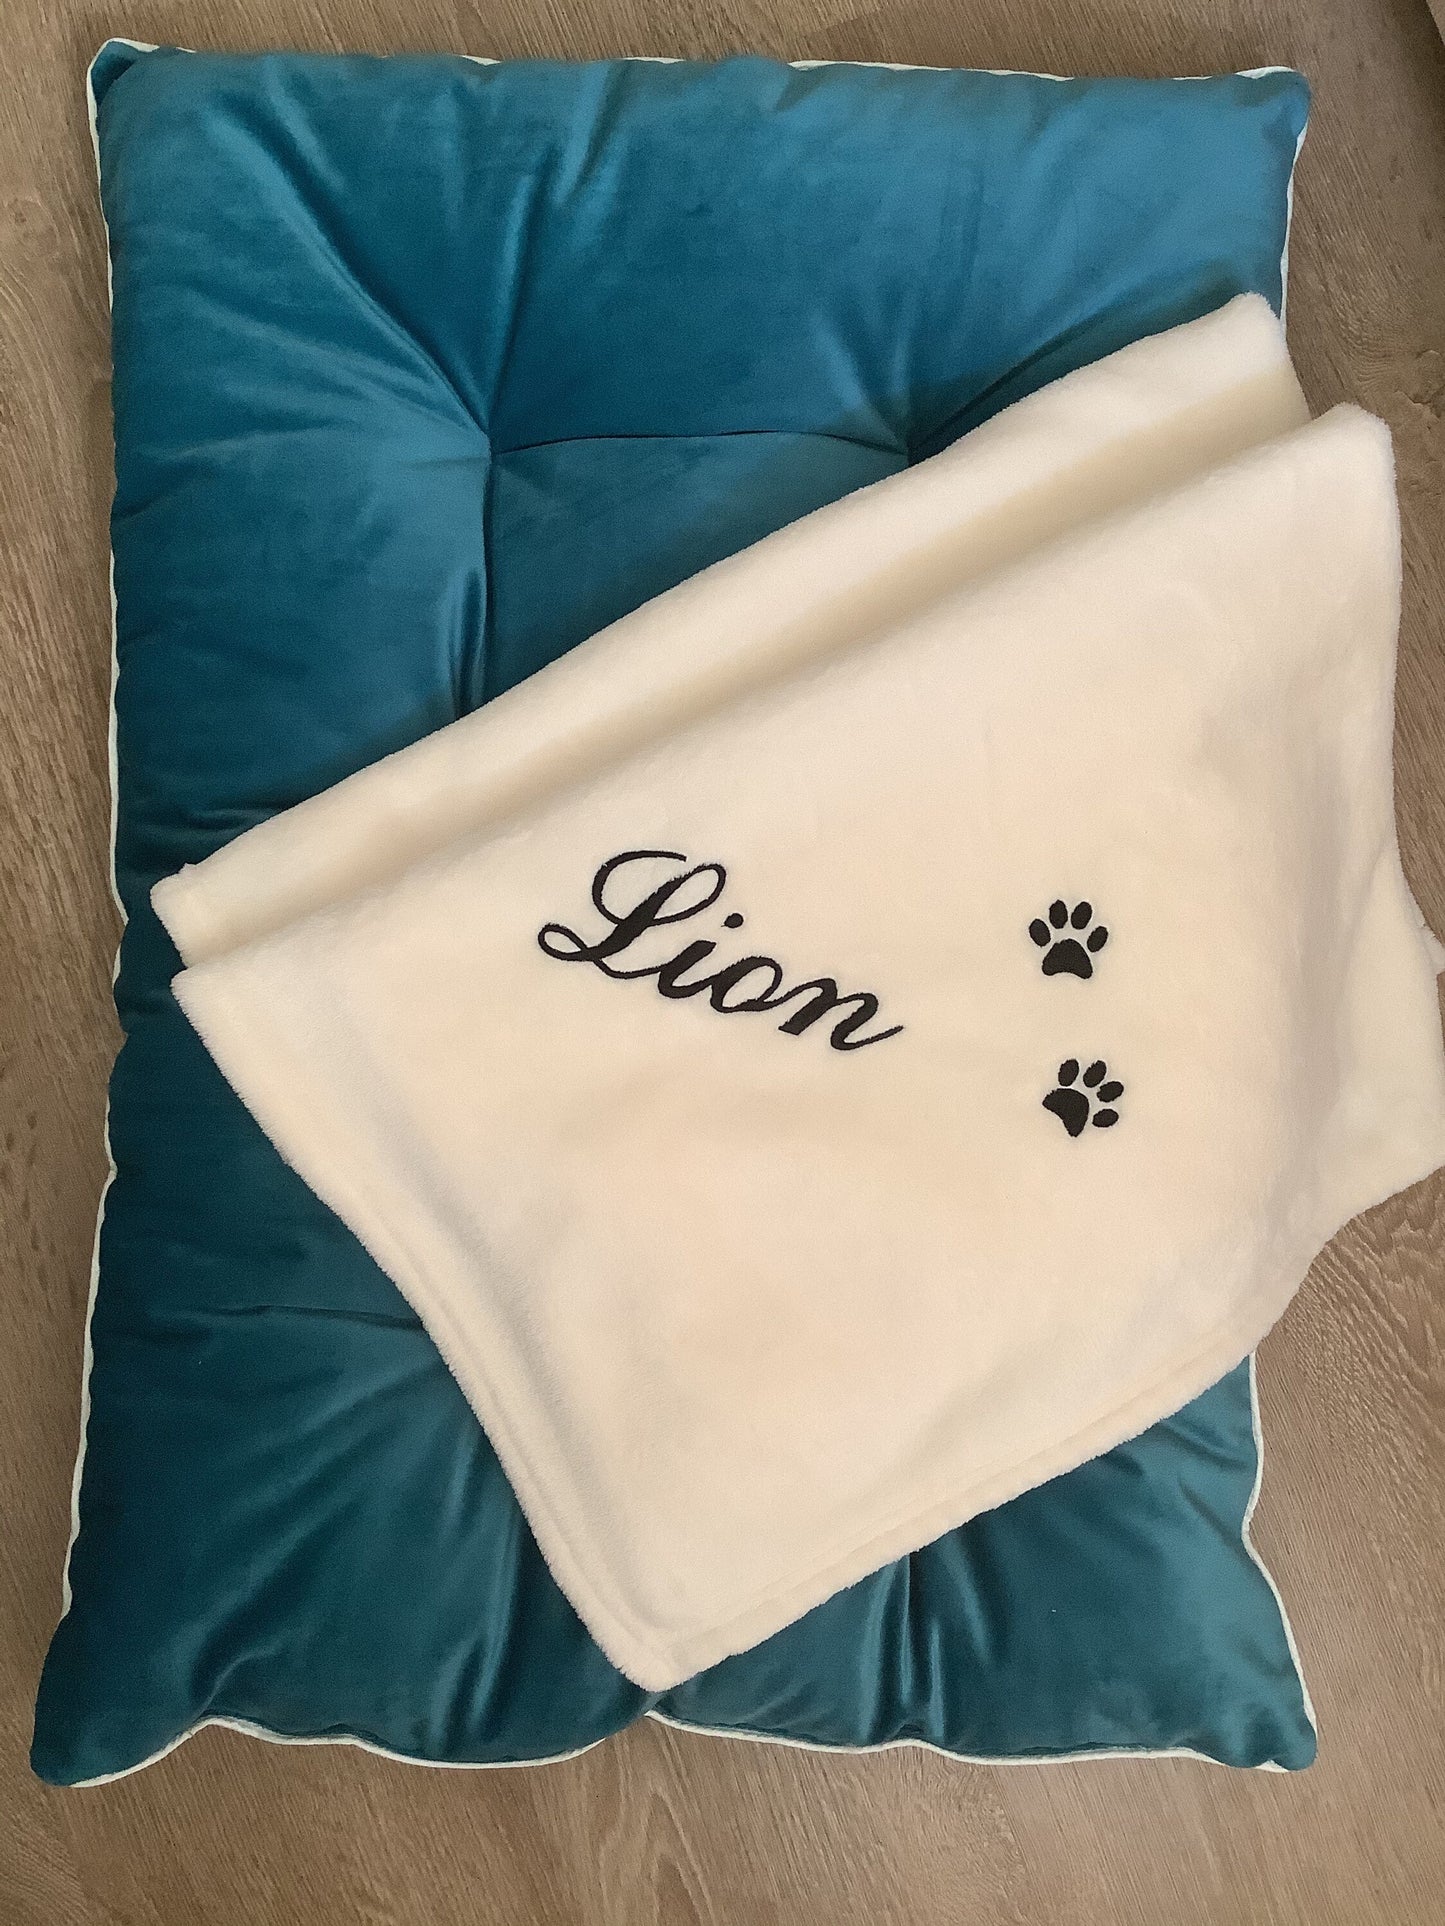 Extra pillowcase for a bed or a pillow of your pet, personalized version of the pillowcase, spare pillowcase, plaid, blanket with pets Name